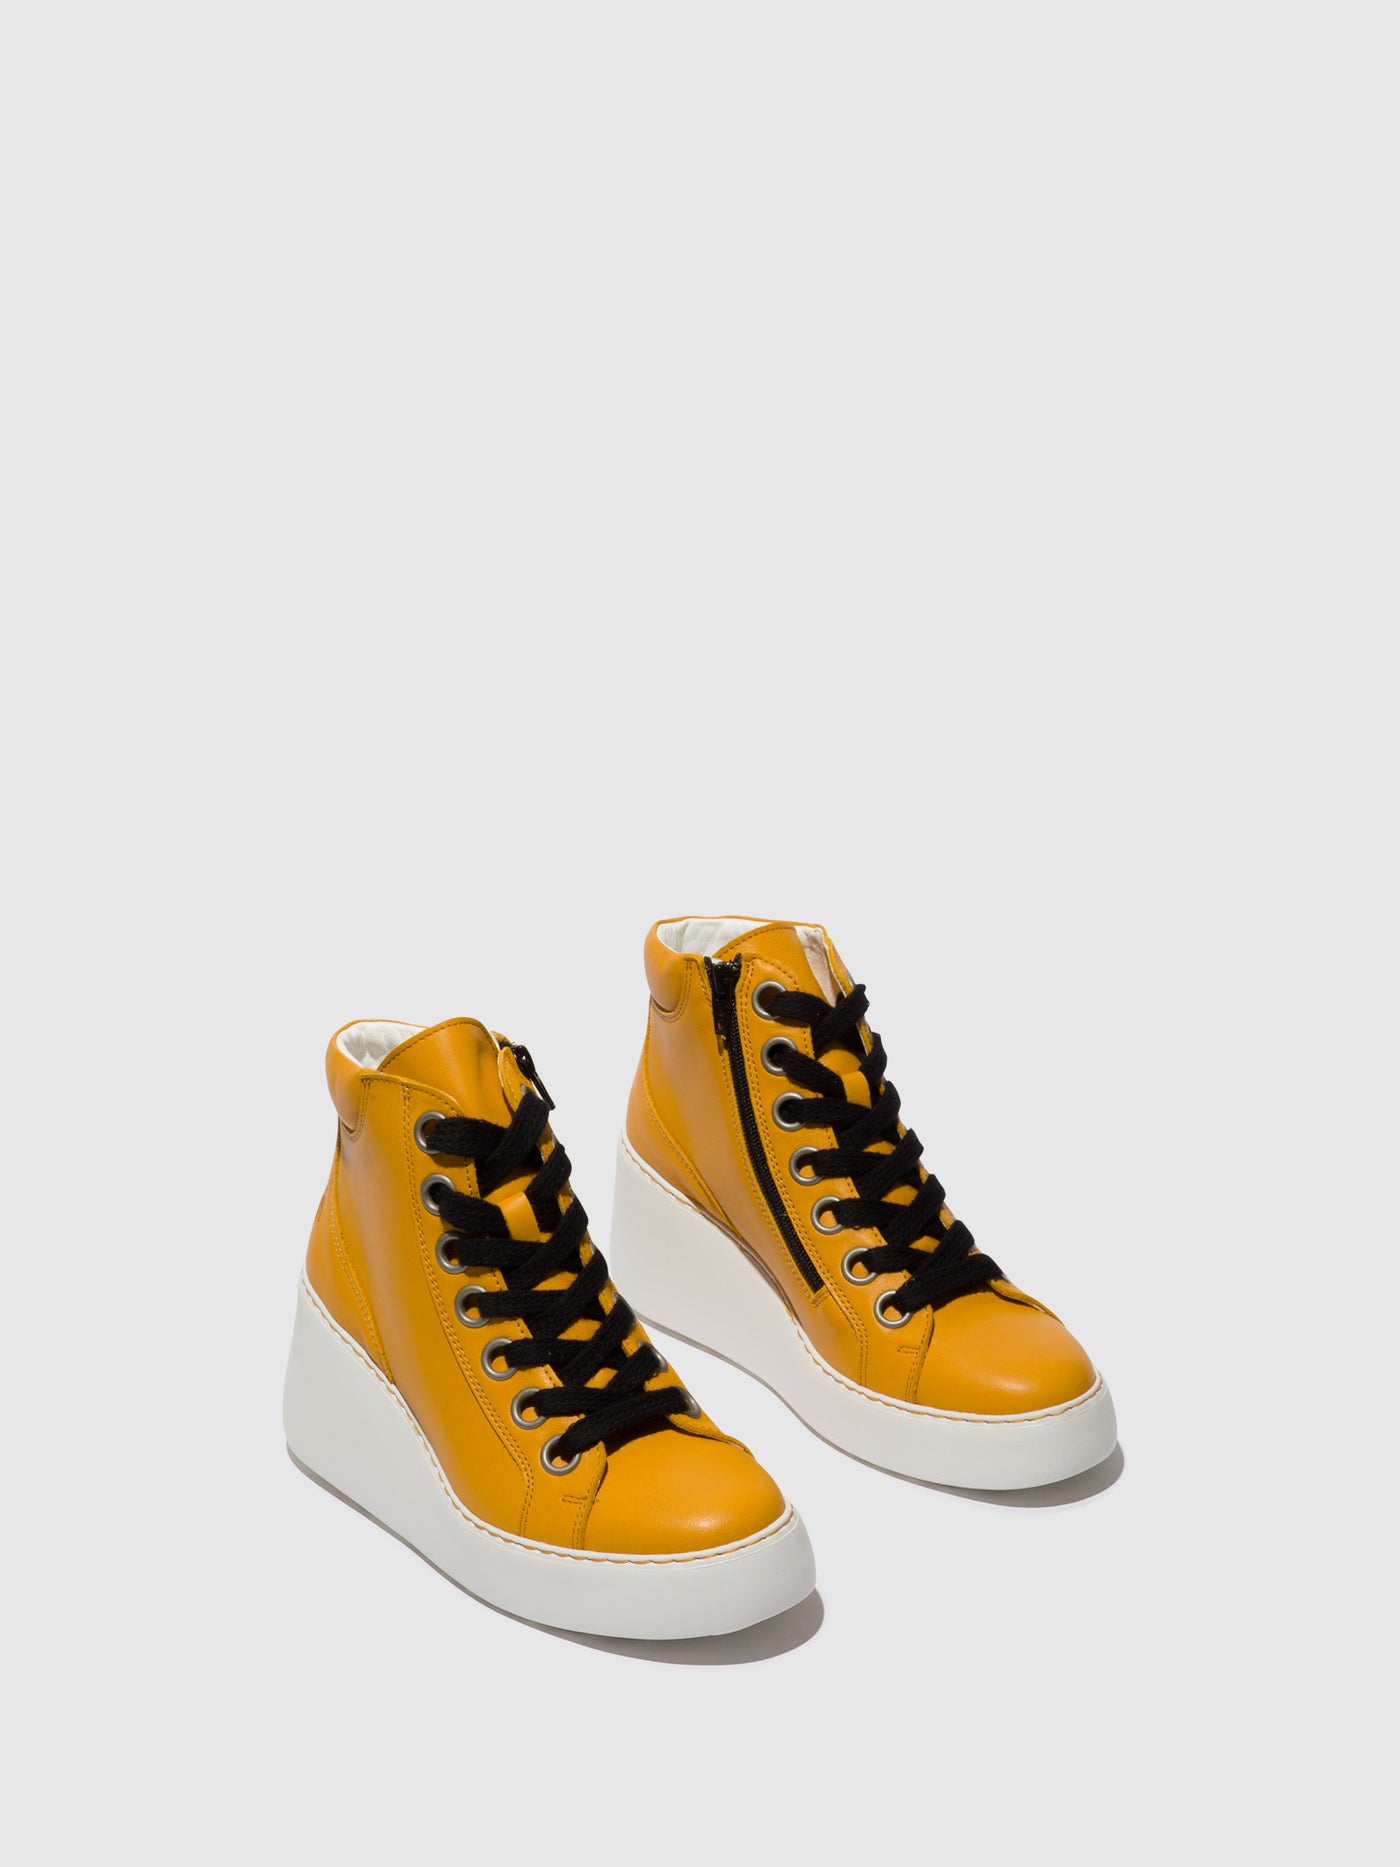 Lace-up Ankle Boots DICE468FLY MUSTARD (OFFWHITE SOLE)